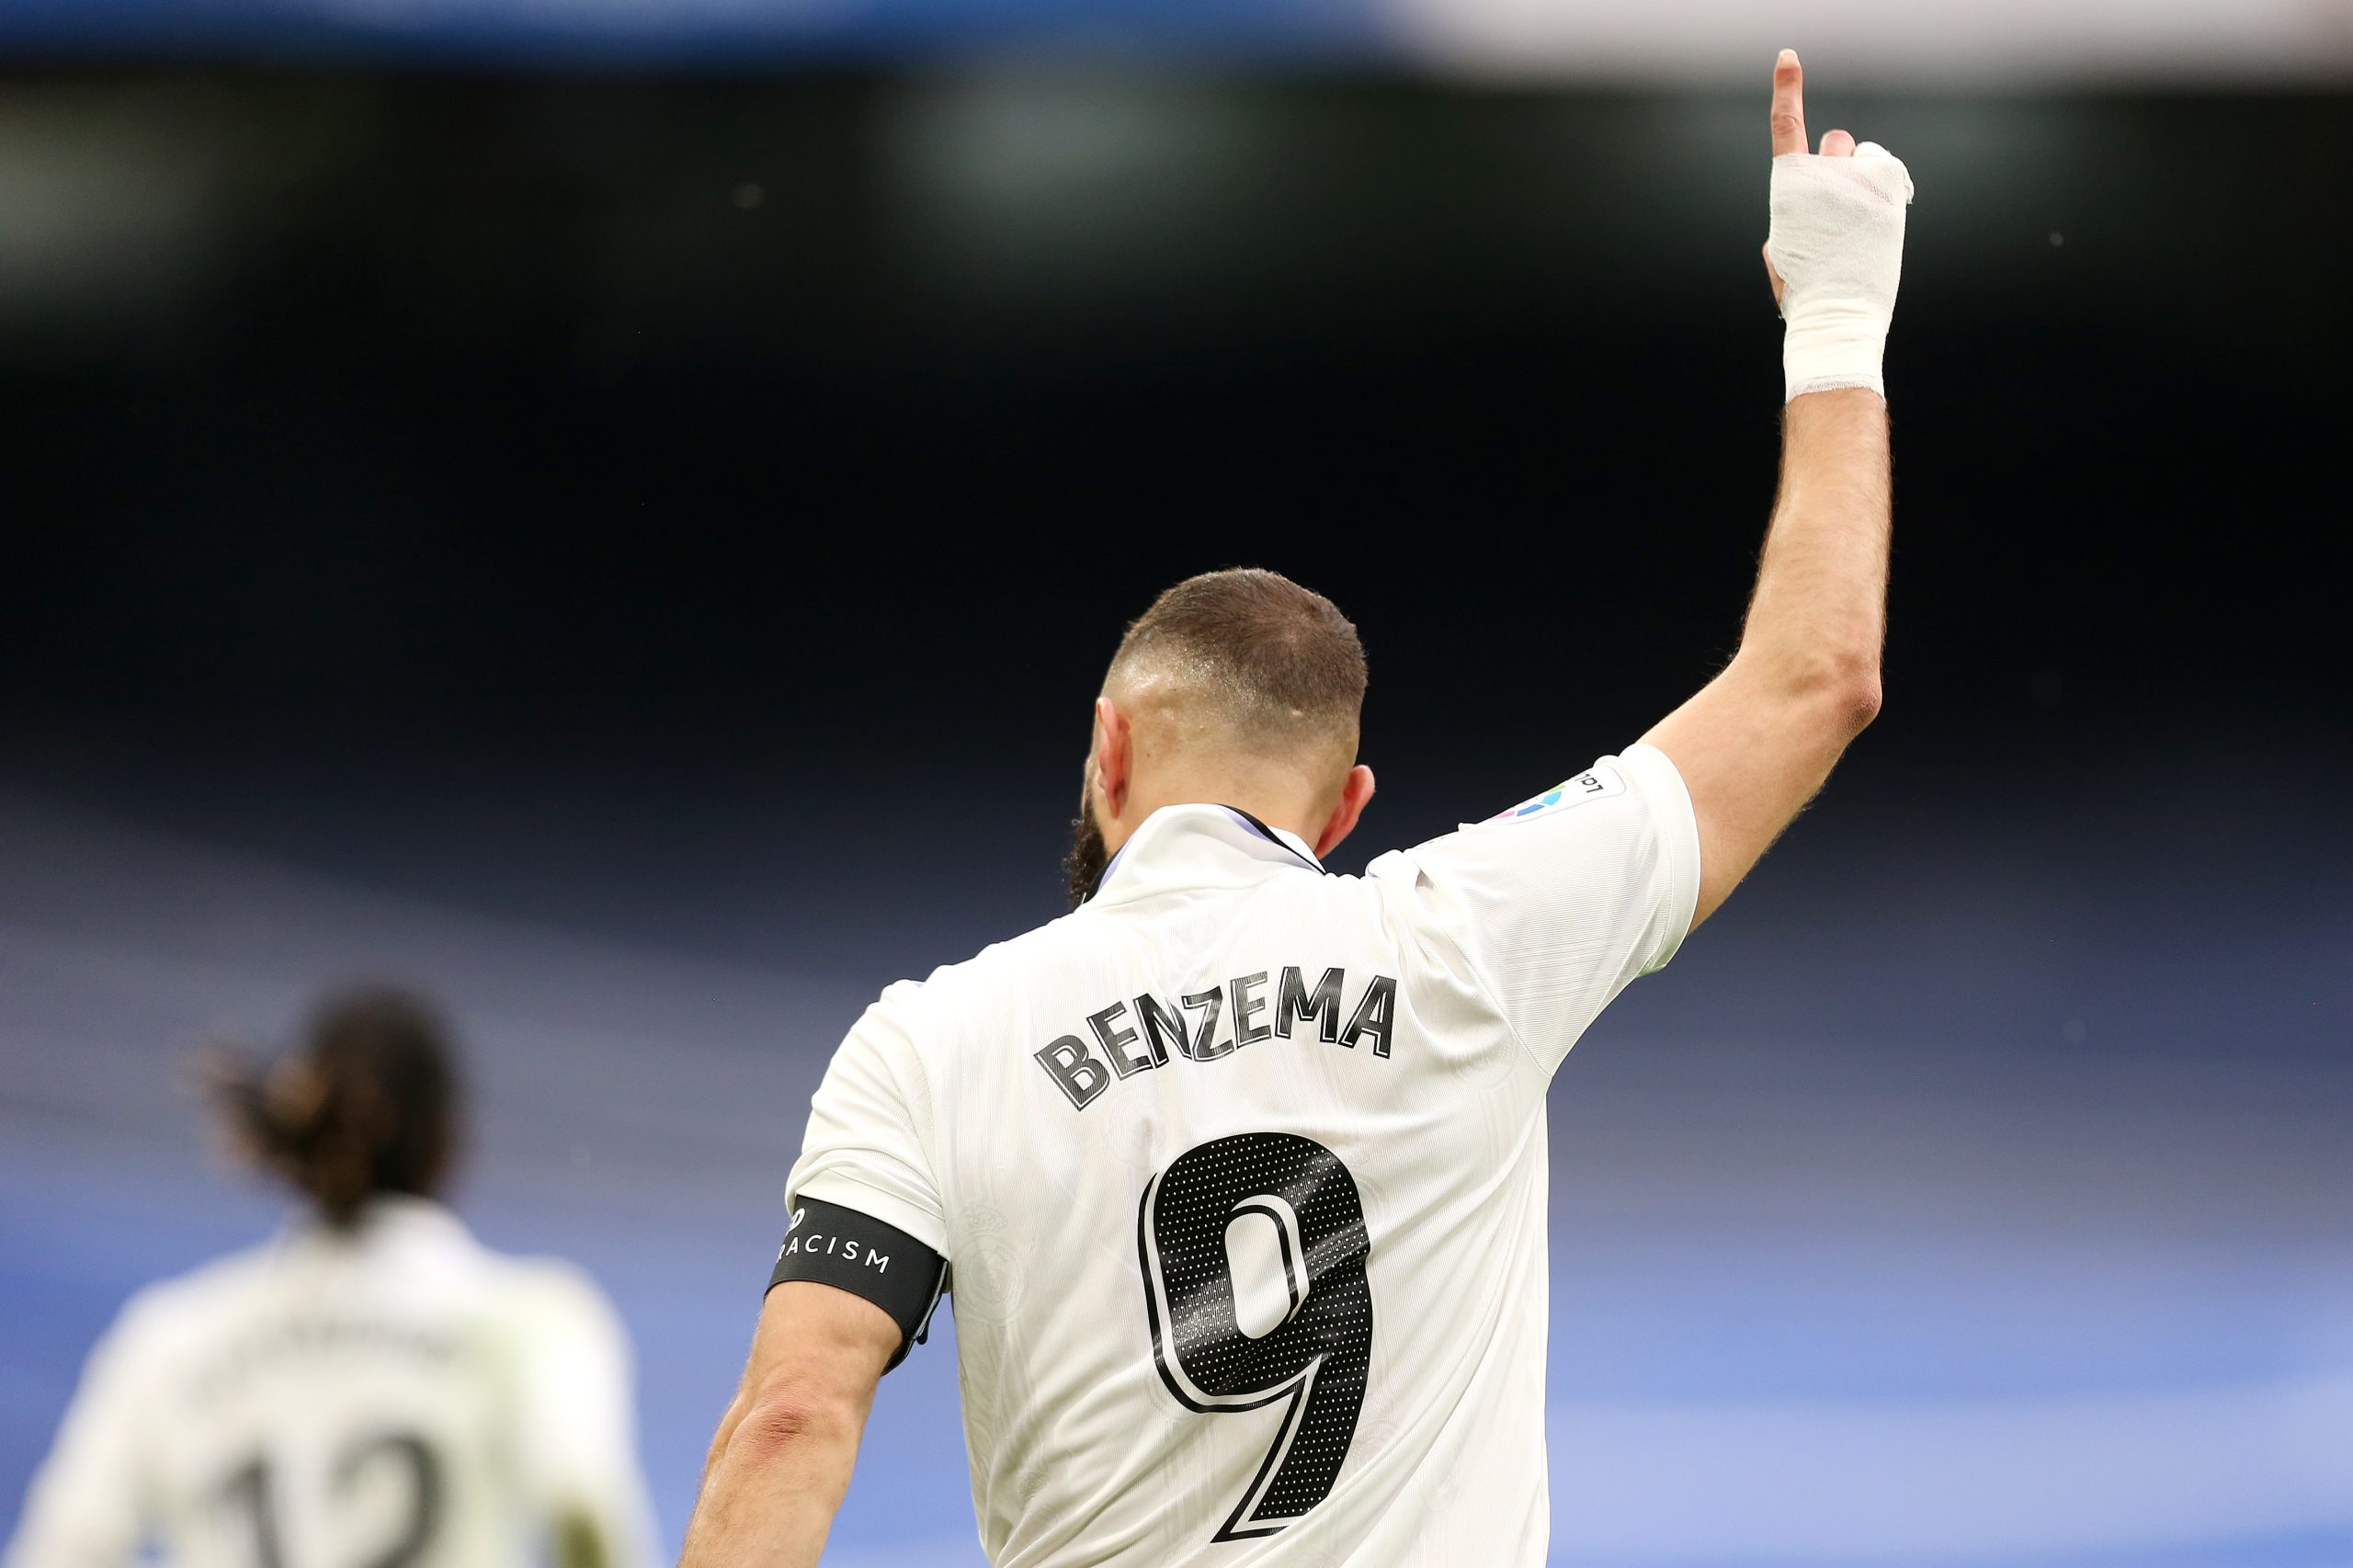 Karim Benzema to leave Real Madrid after 14 years following huge offer from club CaughtOffside